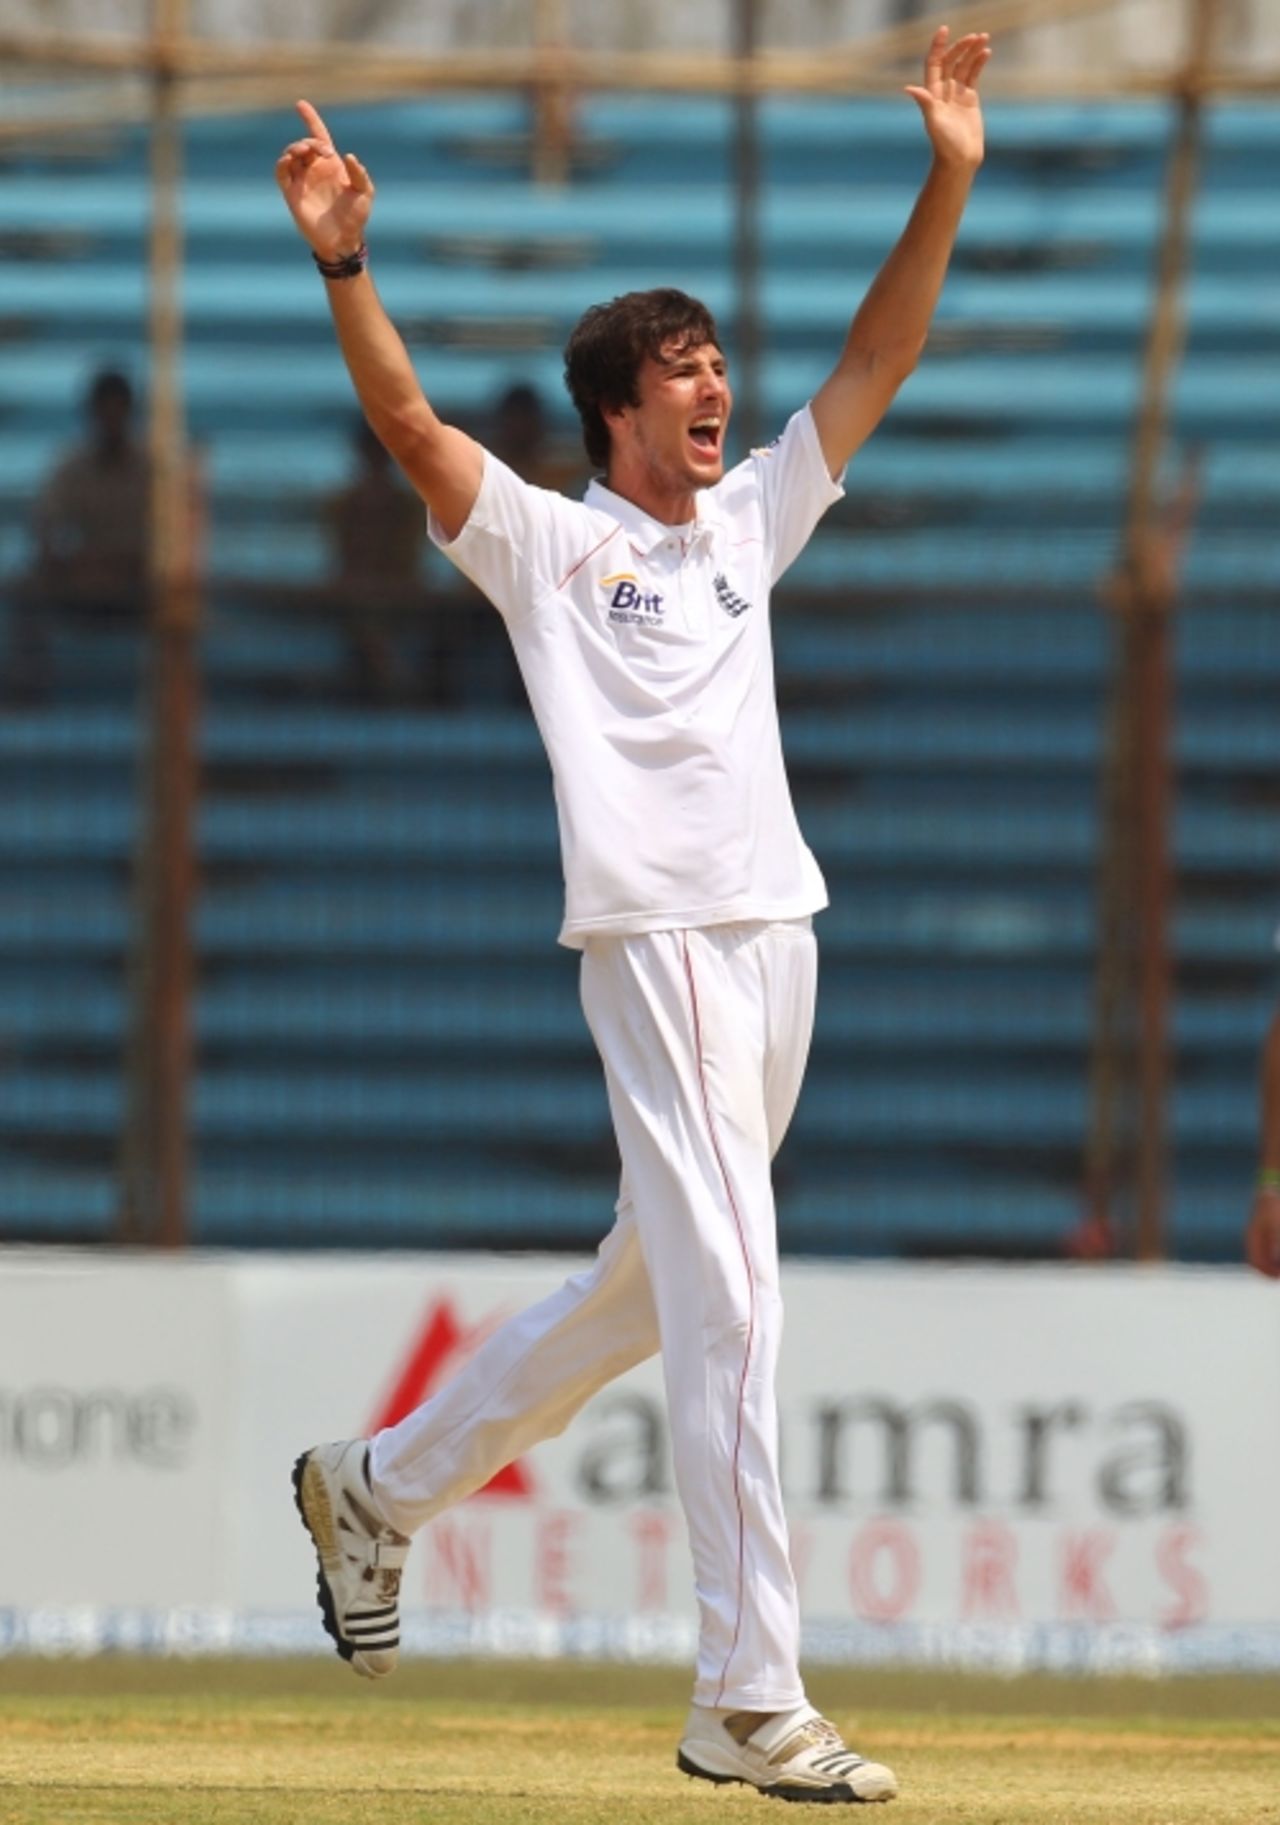 Steven Finn appeals for a wicket, Bangladesh v England, 1st Test, Chittagong, March 15, 2010